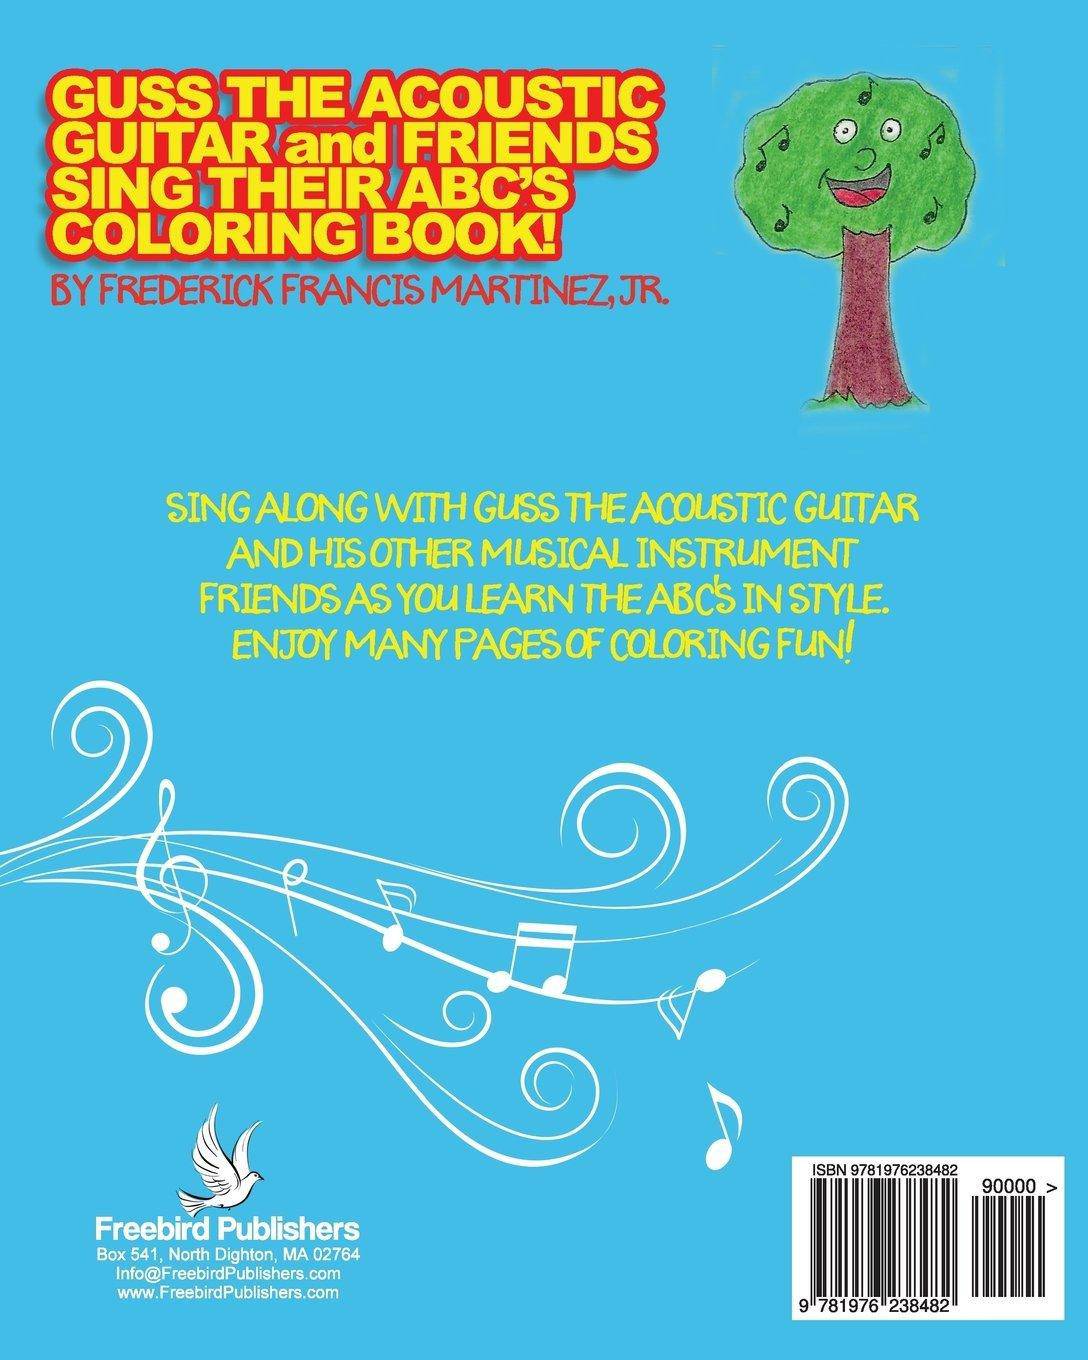 Guss The Acoutic Guitar And Friends - SureShot Books Publishing LLC